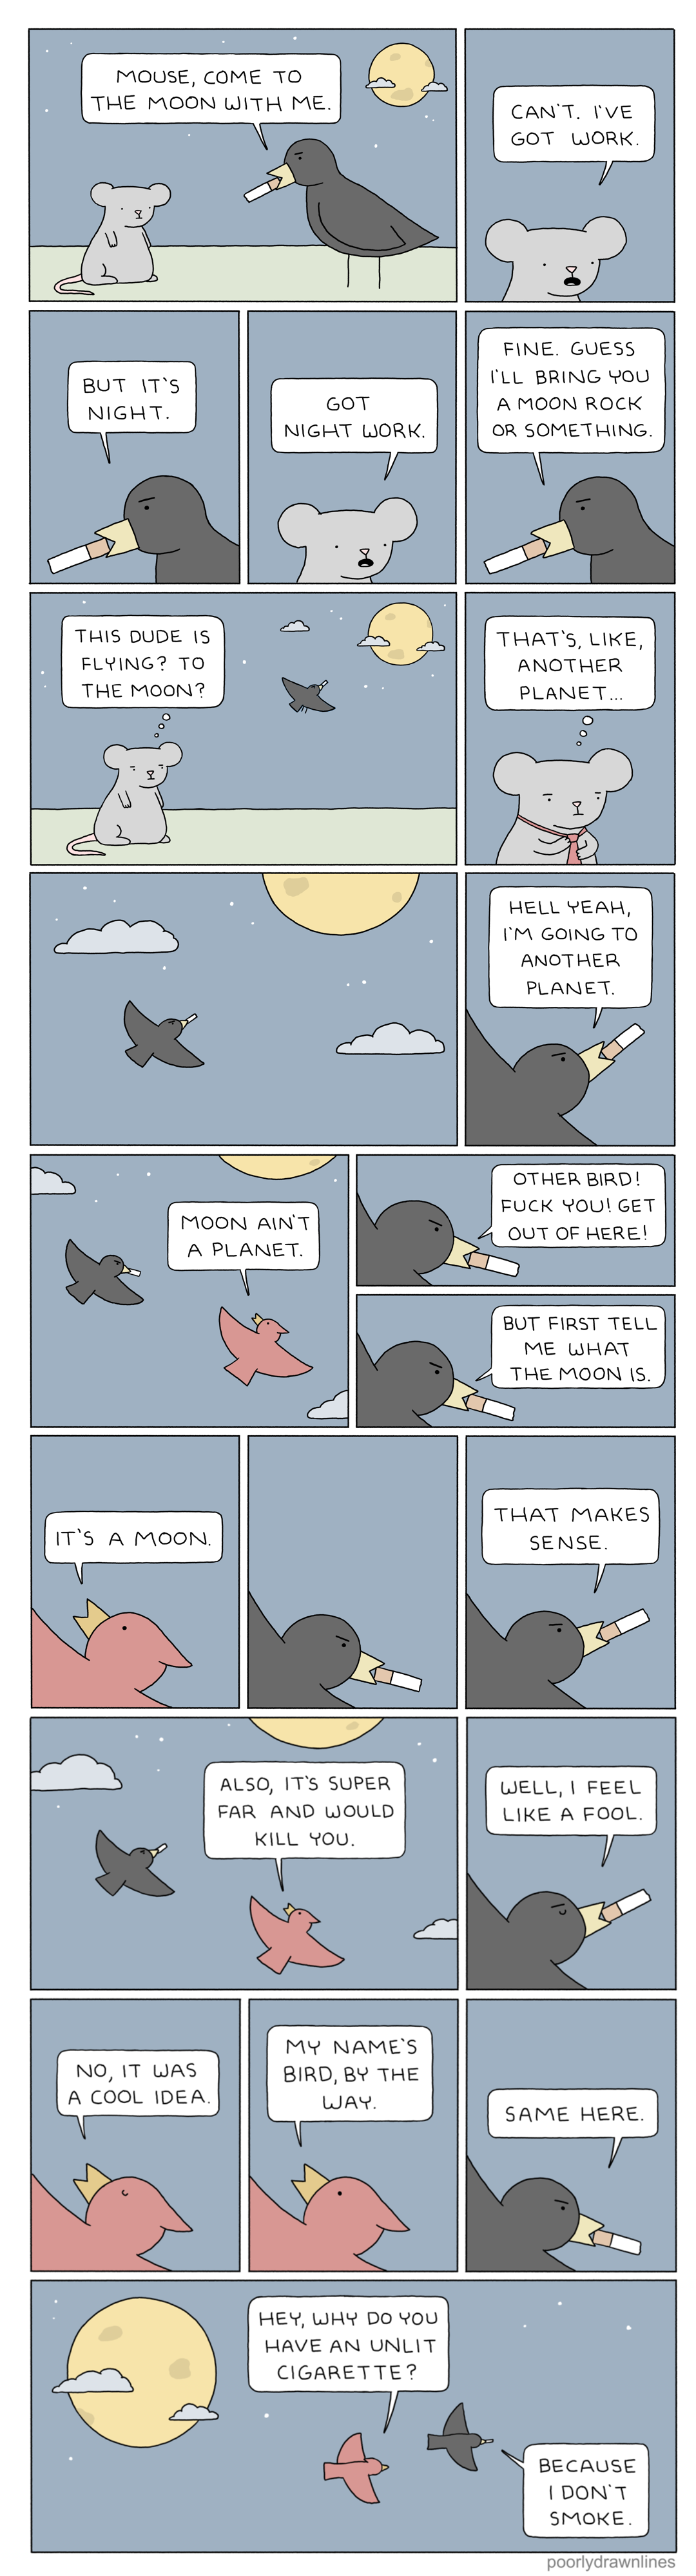 Poorly Drawn Lines – The Moon (2)